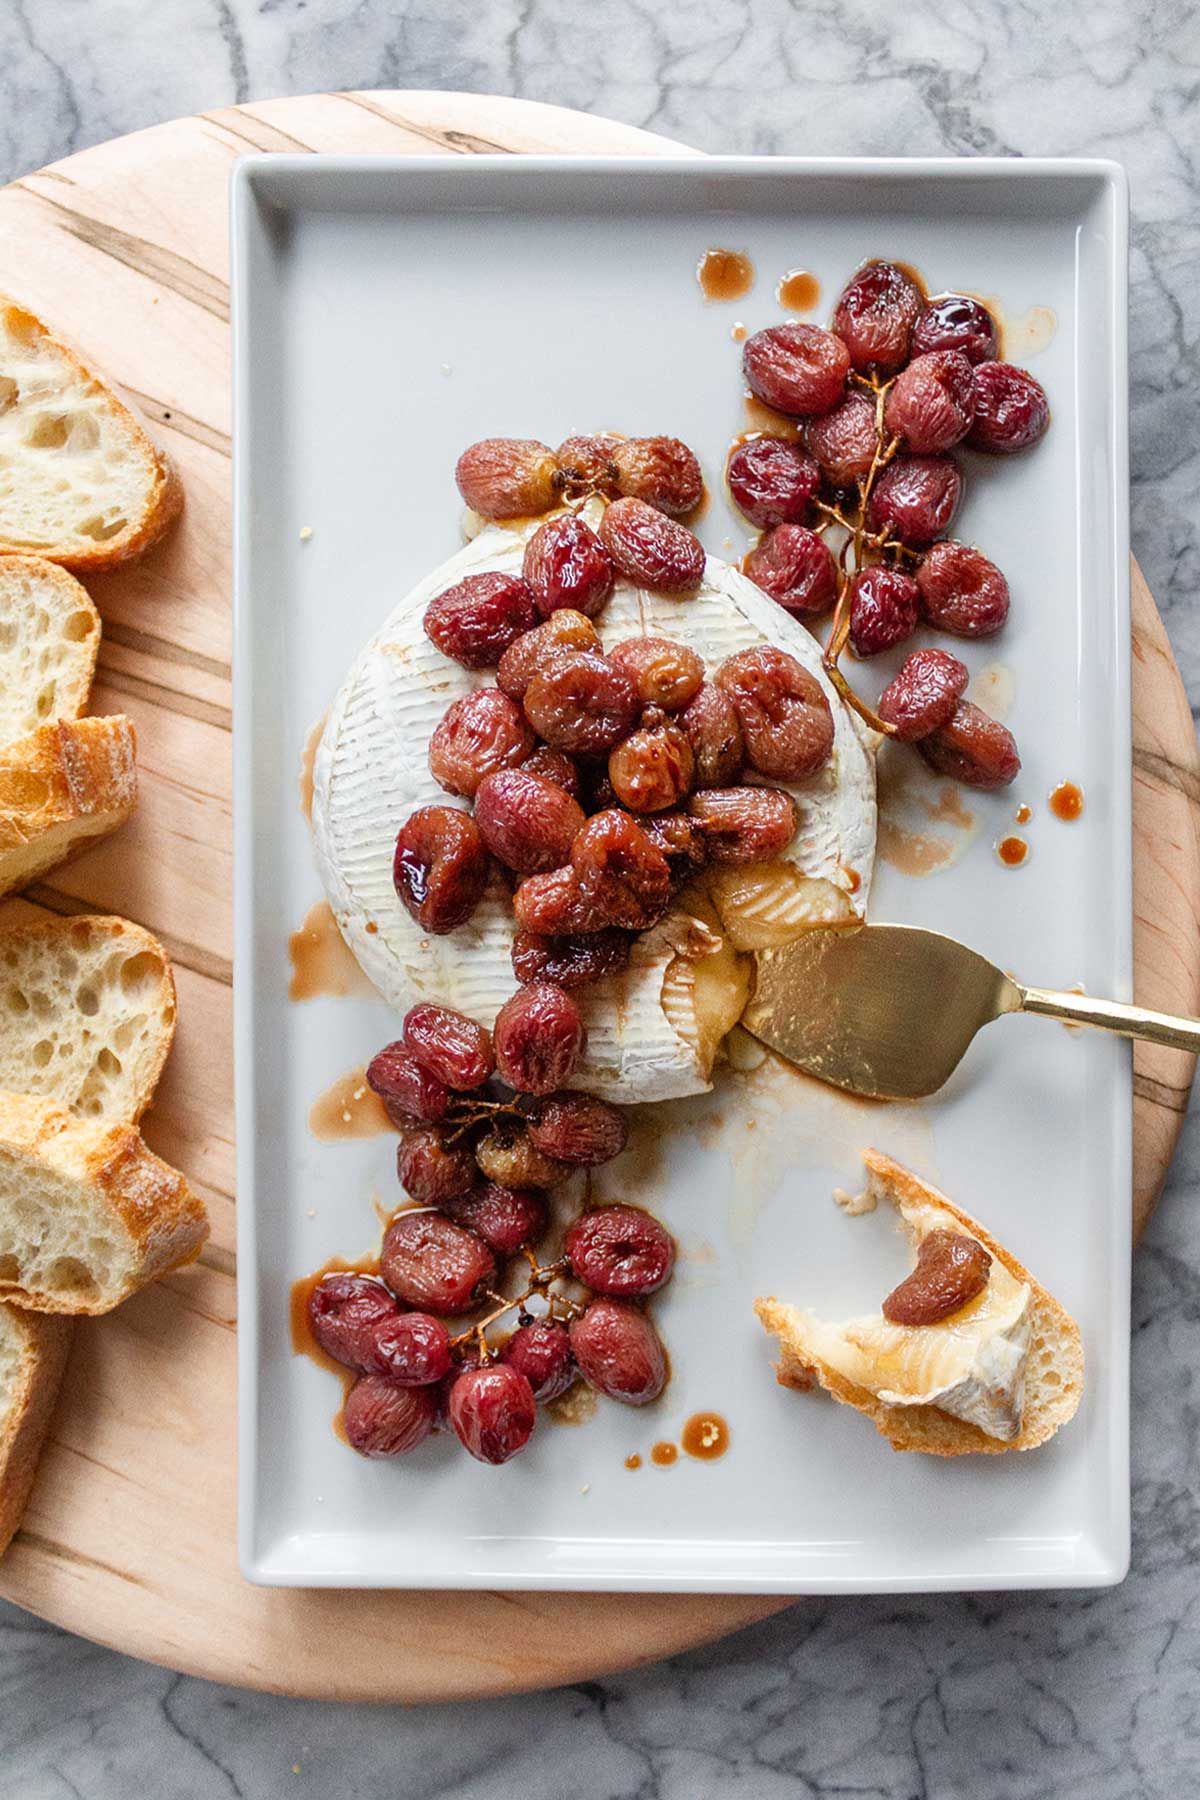 A white ceramic serving plate with a wheel or Baked Brie topped with Roasted Red Grapes. The plate is sitting on top of a round wooden cheese board with slices of fresh baguette.